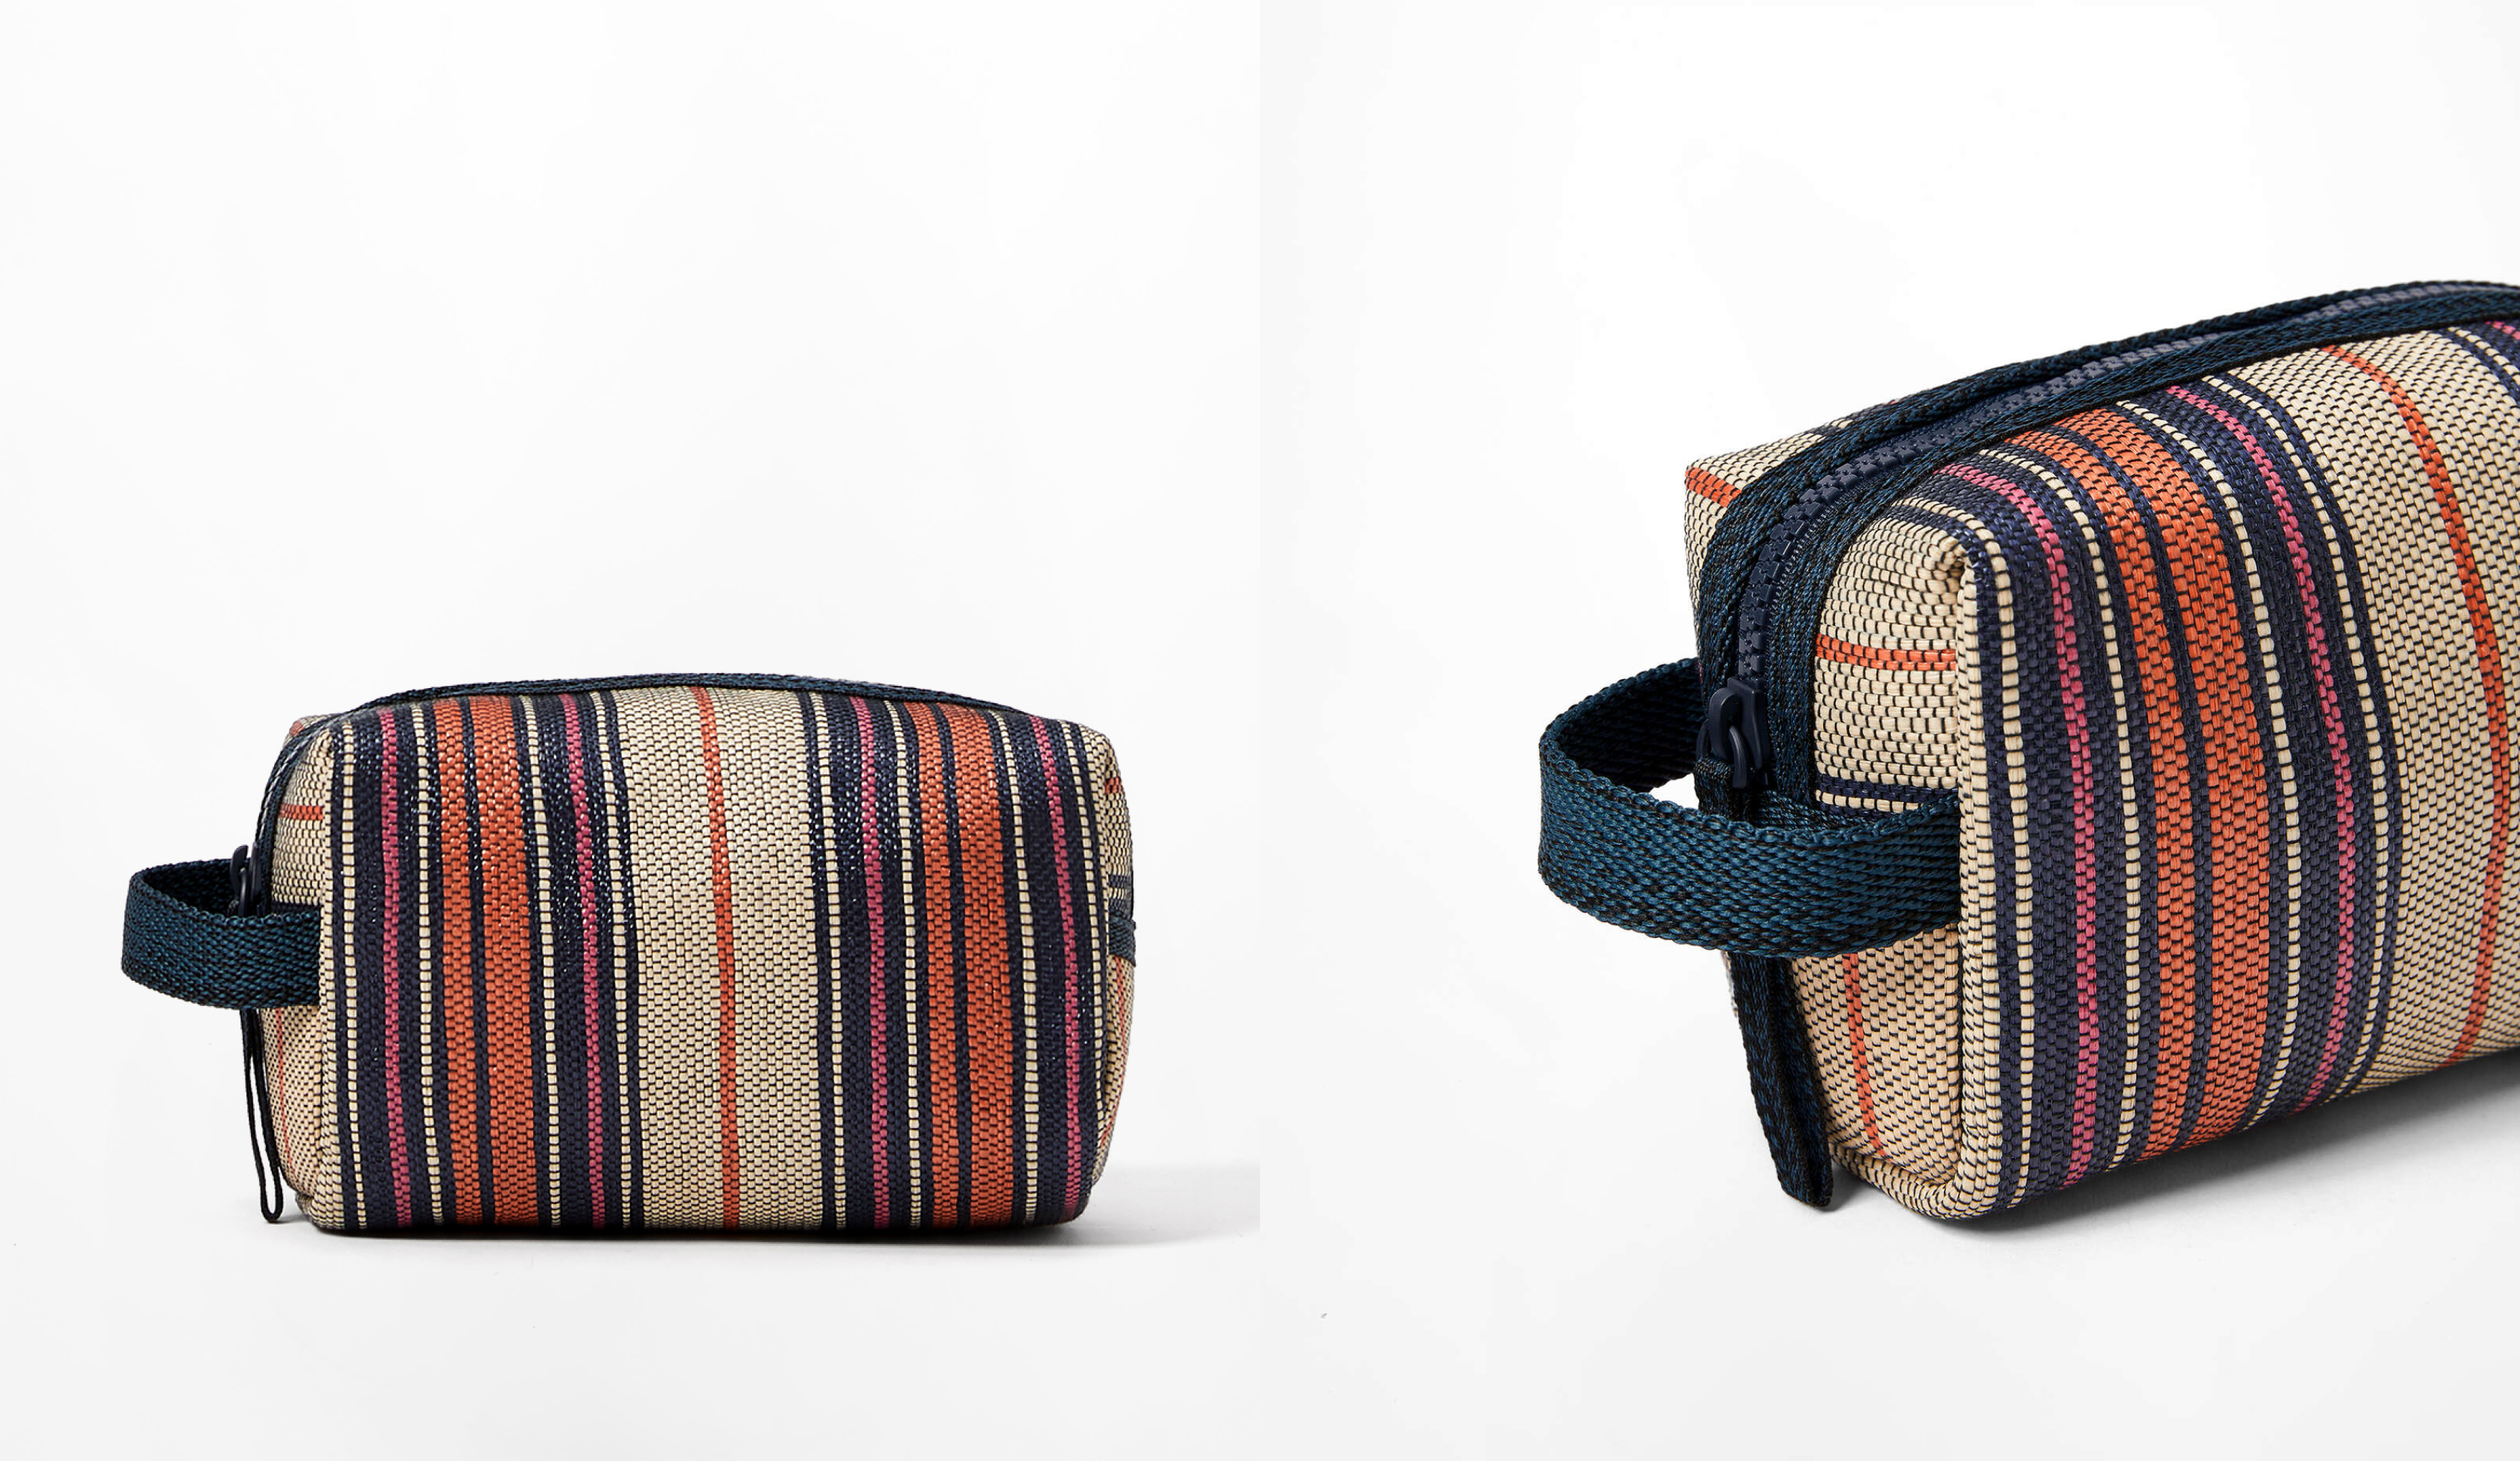 Striped toiletry bag